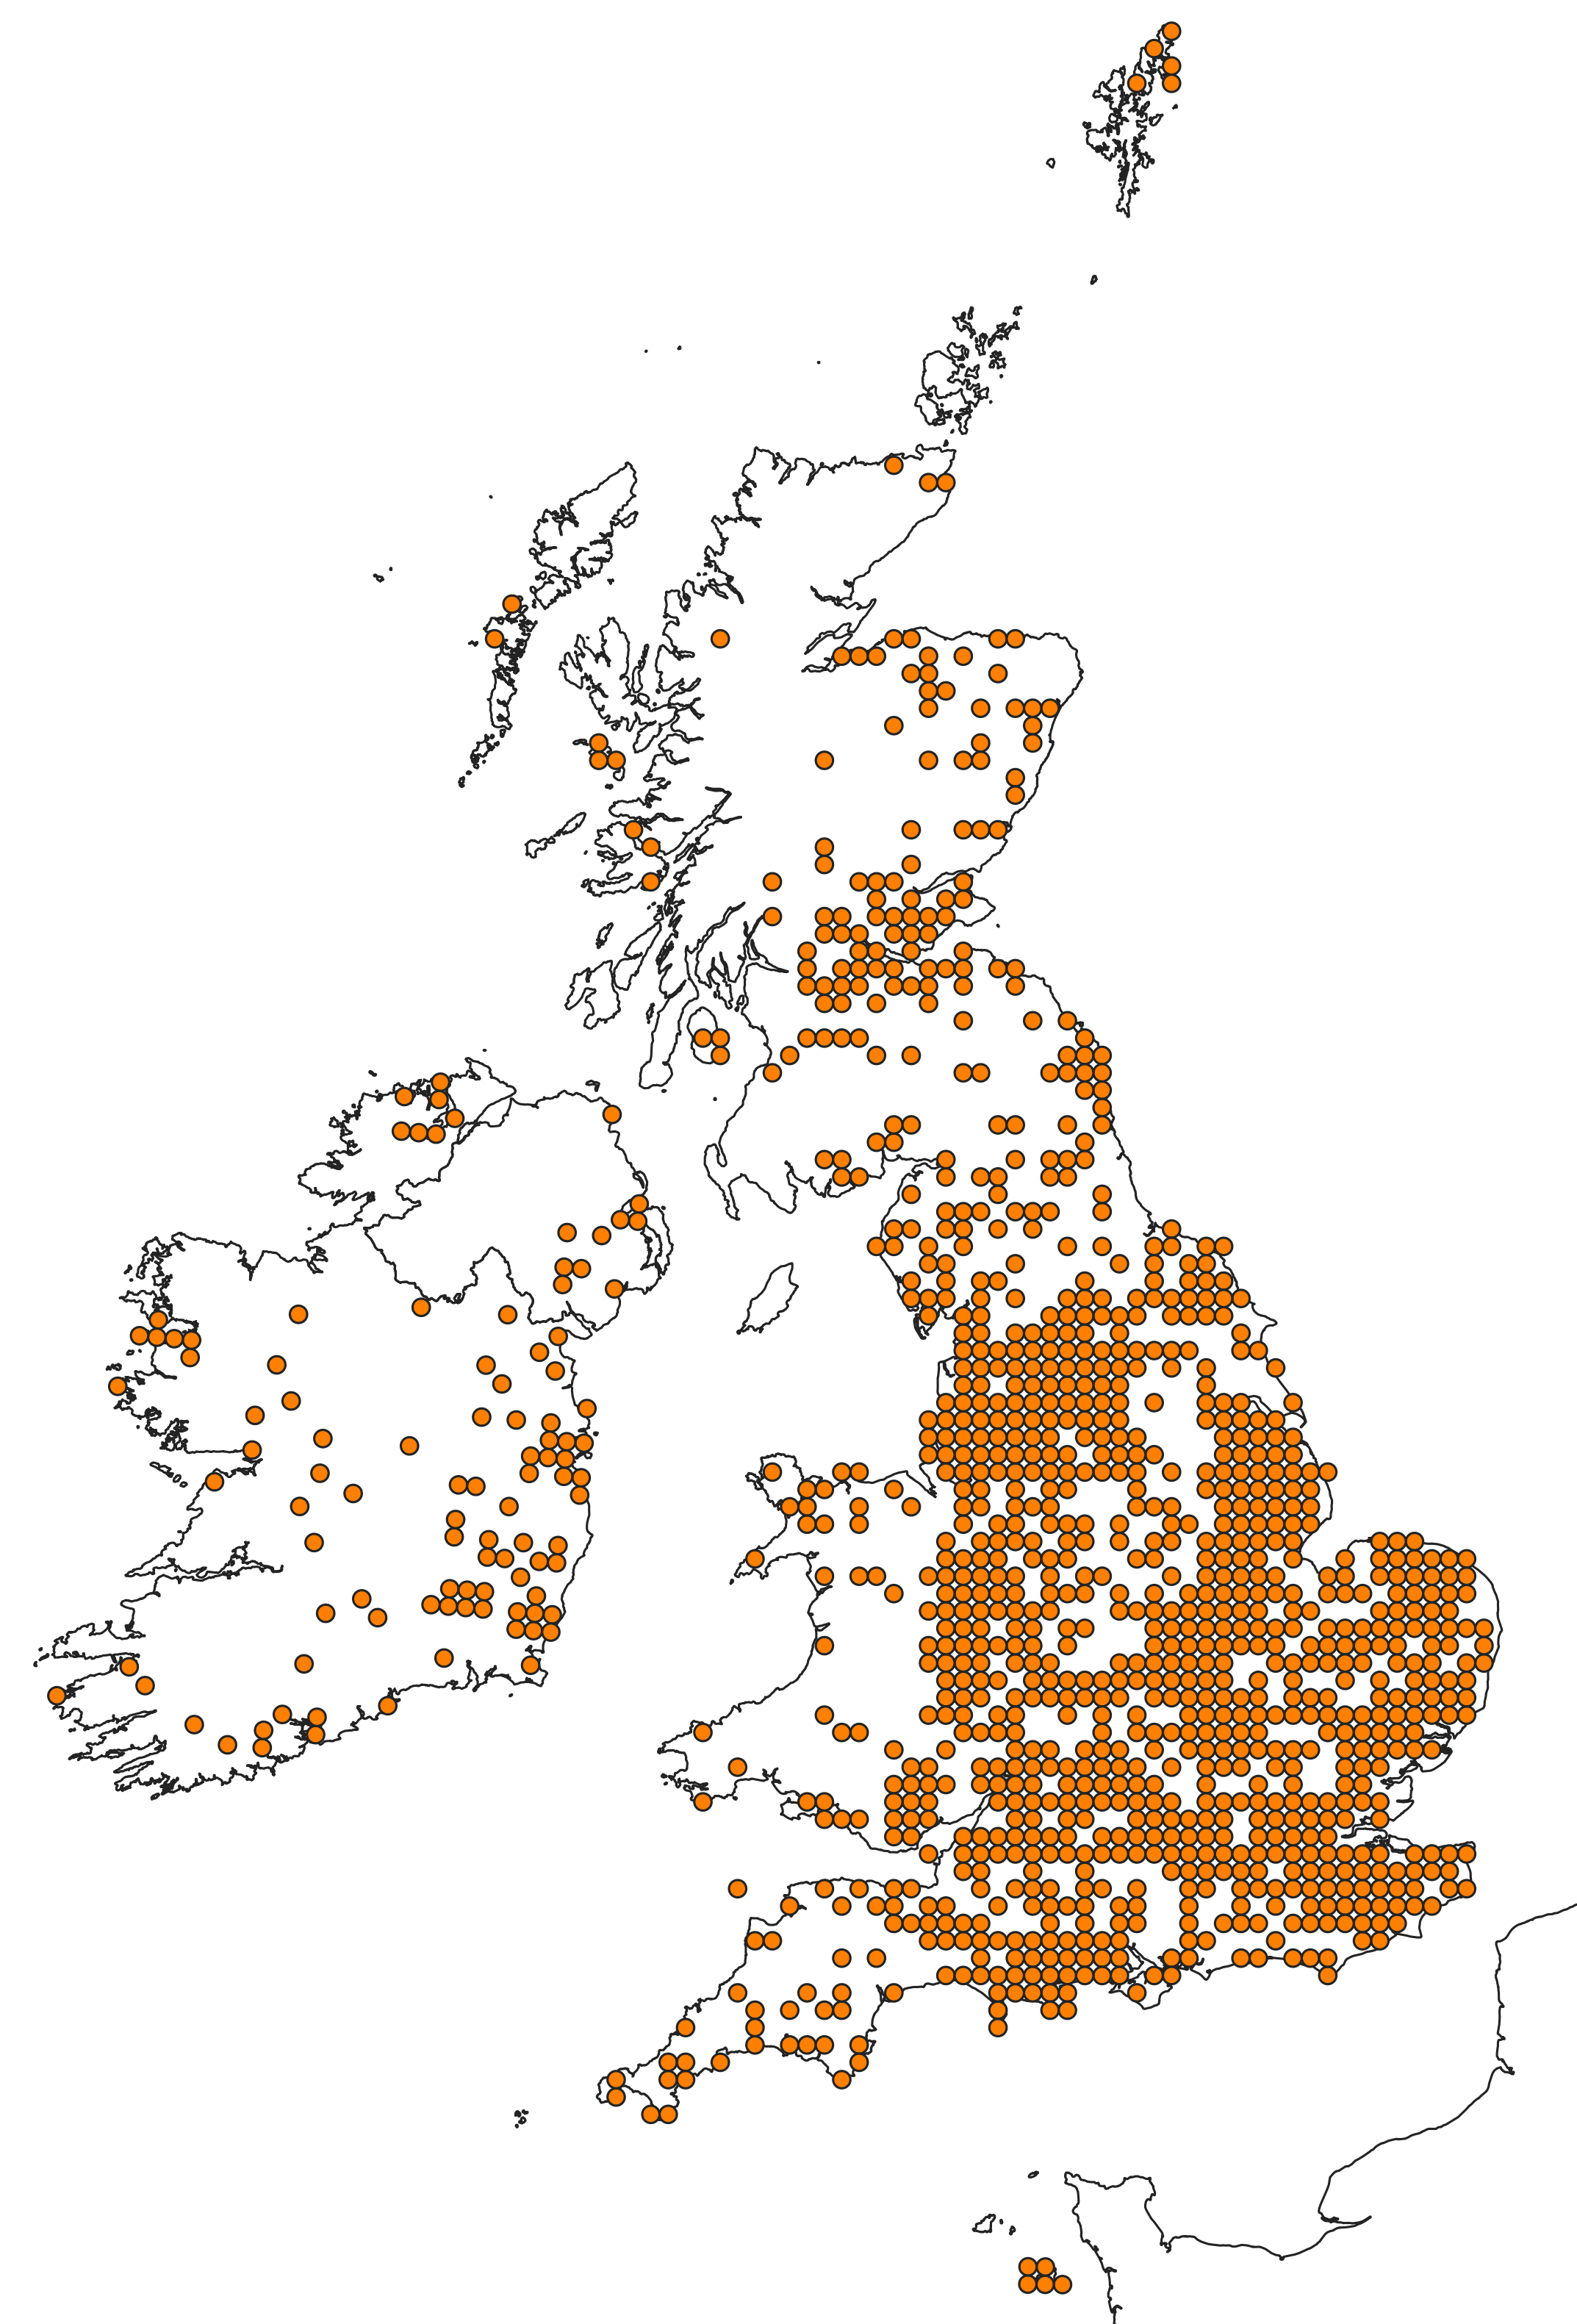 Distribution map of existing earthworm records across the British Isles (c) Earthworm Society of Britain (last updated 31st July 2020)